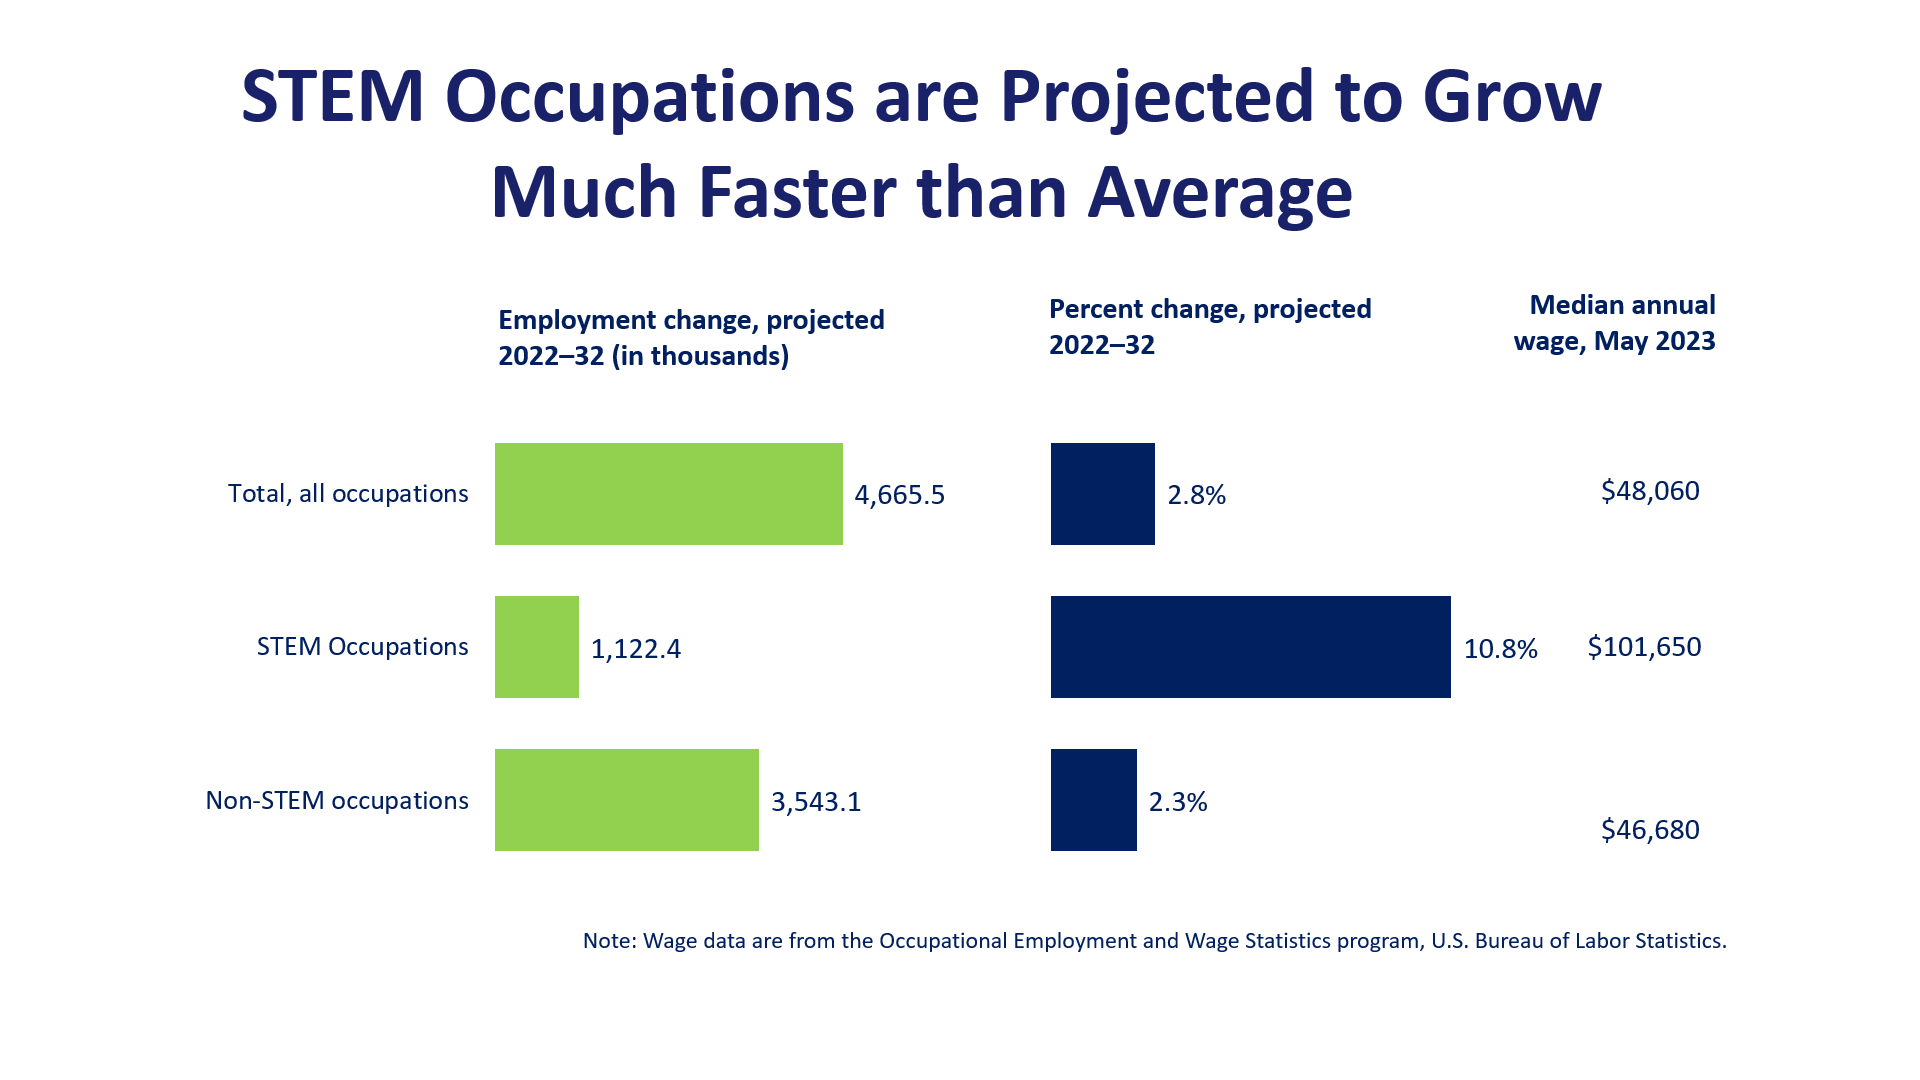 STEM occupations are projected to grow faster than the average for all occupations